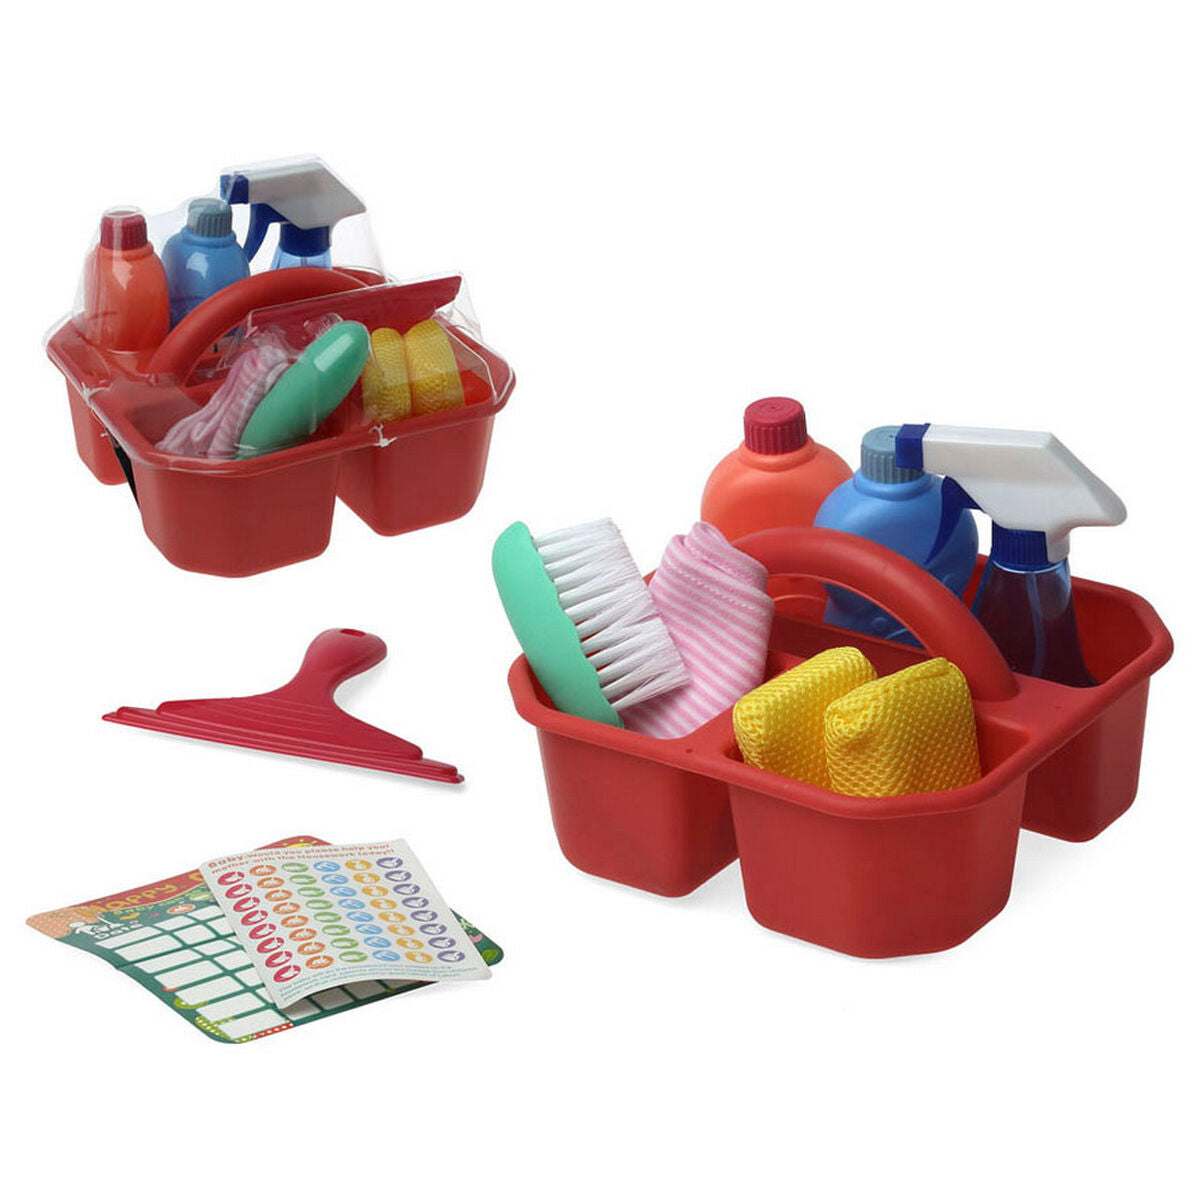 Cleaning & Storage Kit - Little Baby Shop